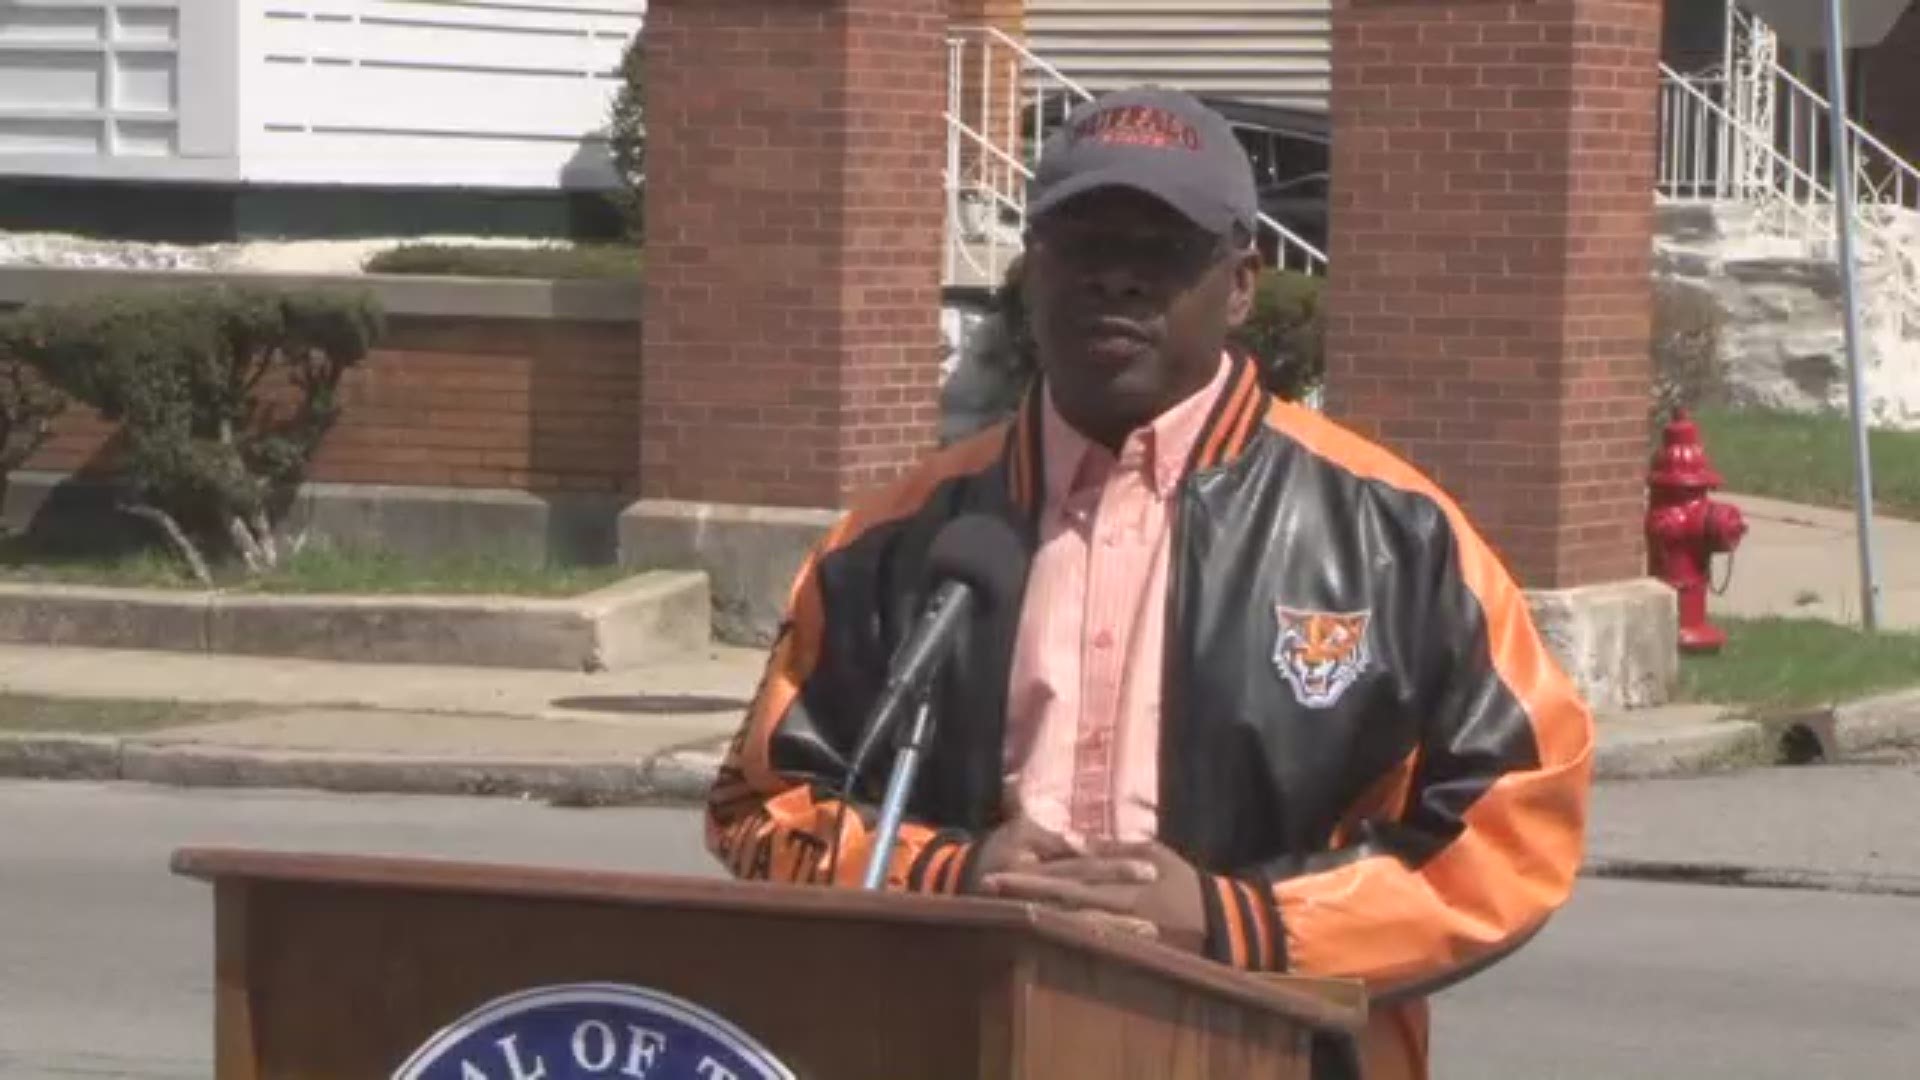 On Saturday Buffalo Mayor Byron Brown announces neighborhood initiative to assist residents during COVID-19.